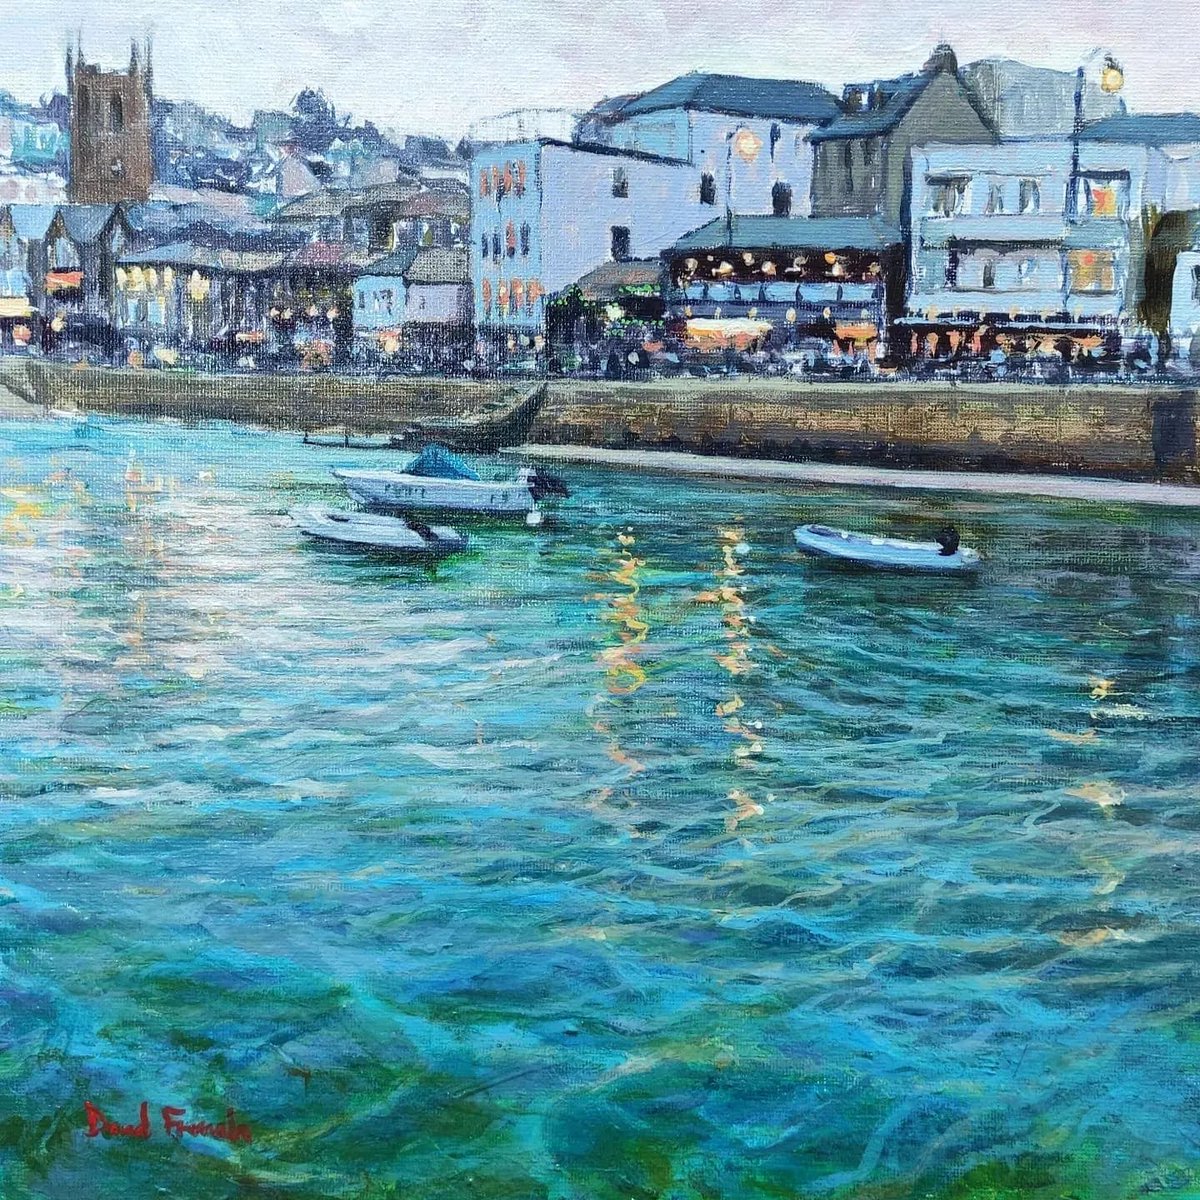 'Evening Reflections' (sold)

St Ives
30 X 30cm acrylic on canvas board
49 X 49cm approx framed size

#cornwall
#www.thearthouses.com
#arthousestives

Paintings of St Ives are exclusively available at the Arthouse Gallery Island Road  thearthouses.com